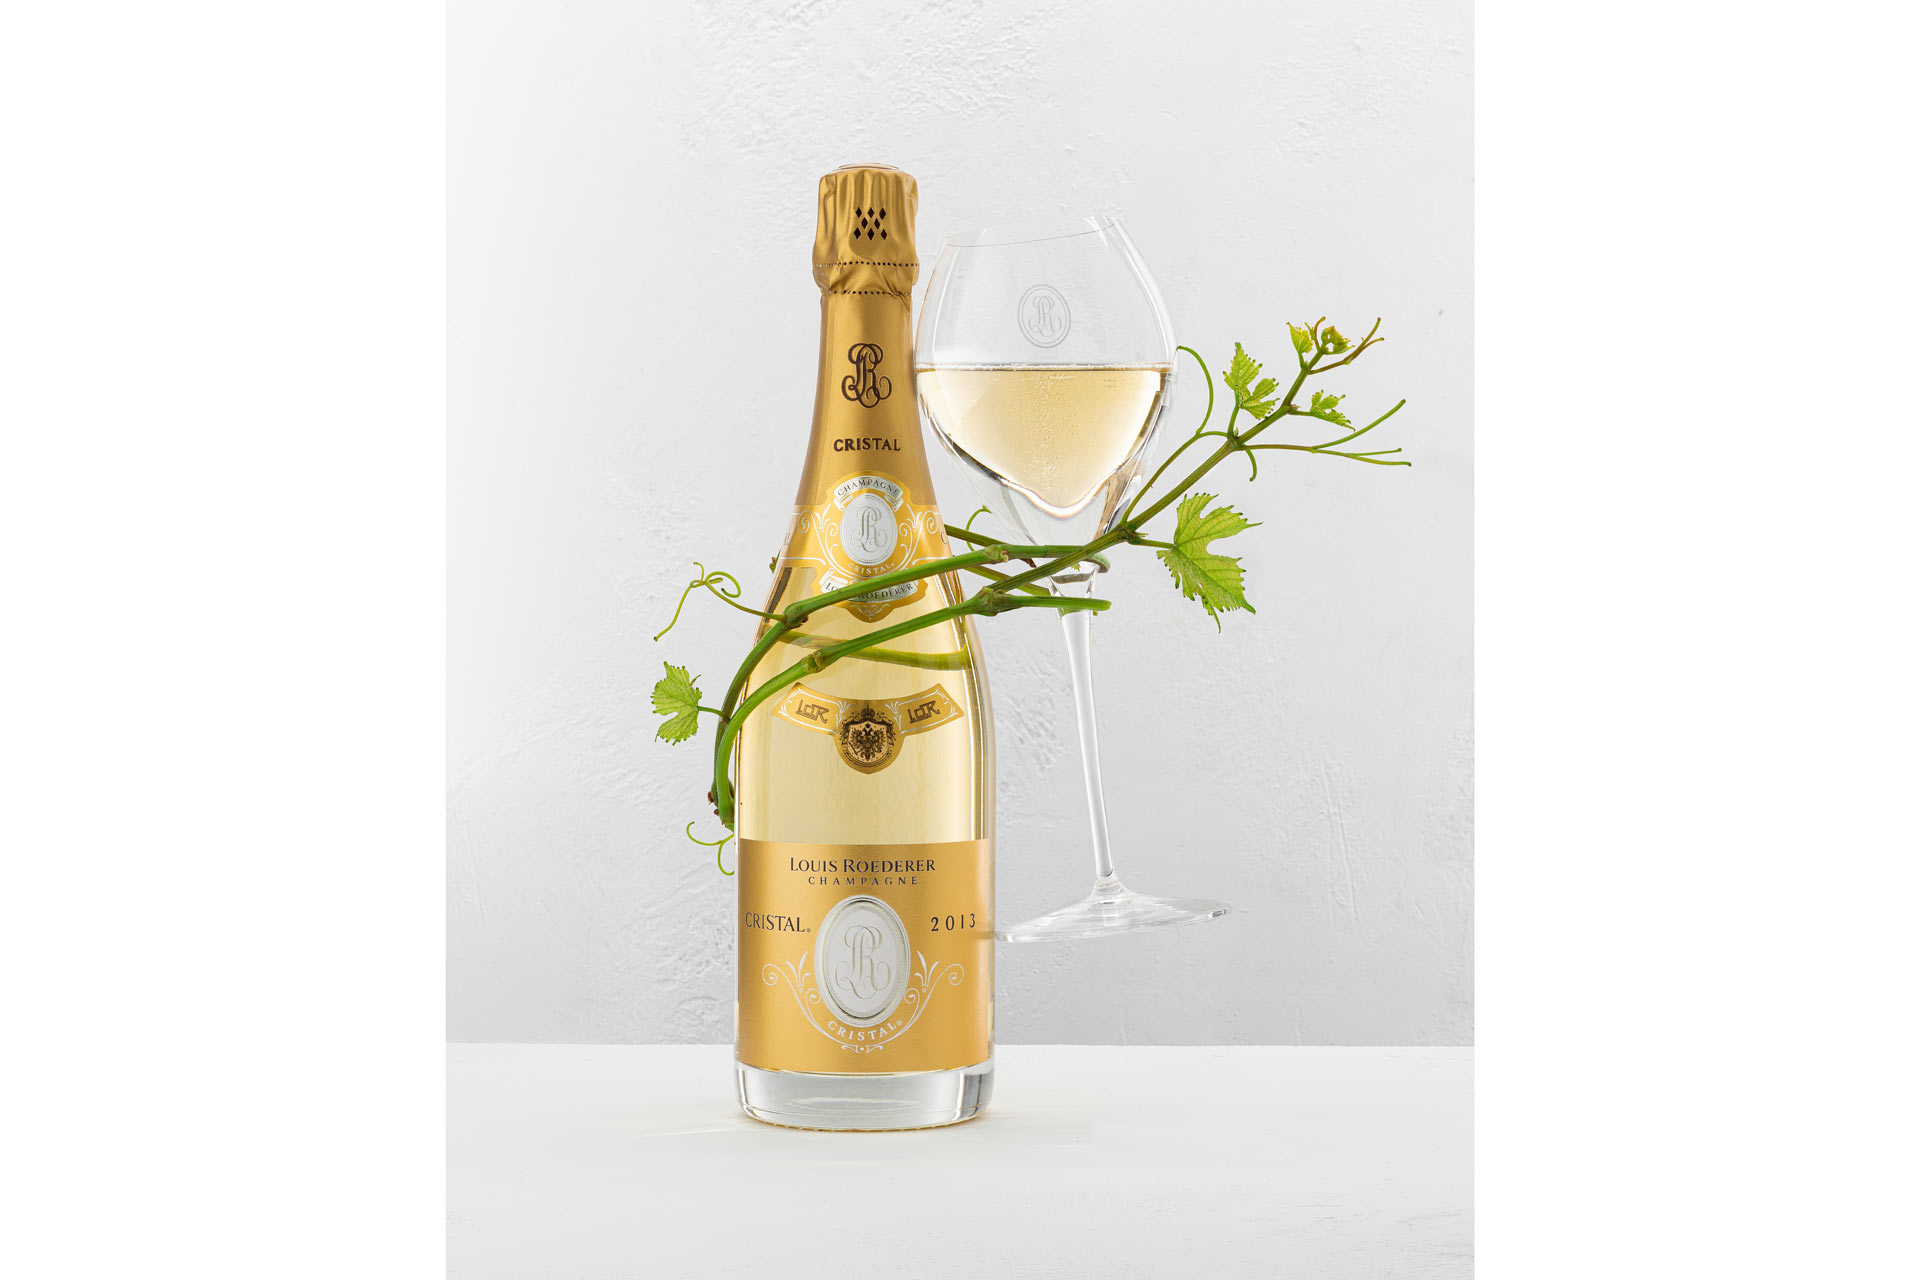 Cristal champagne by Louis Roederer